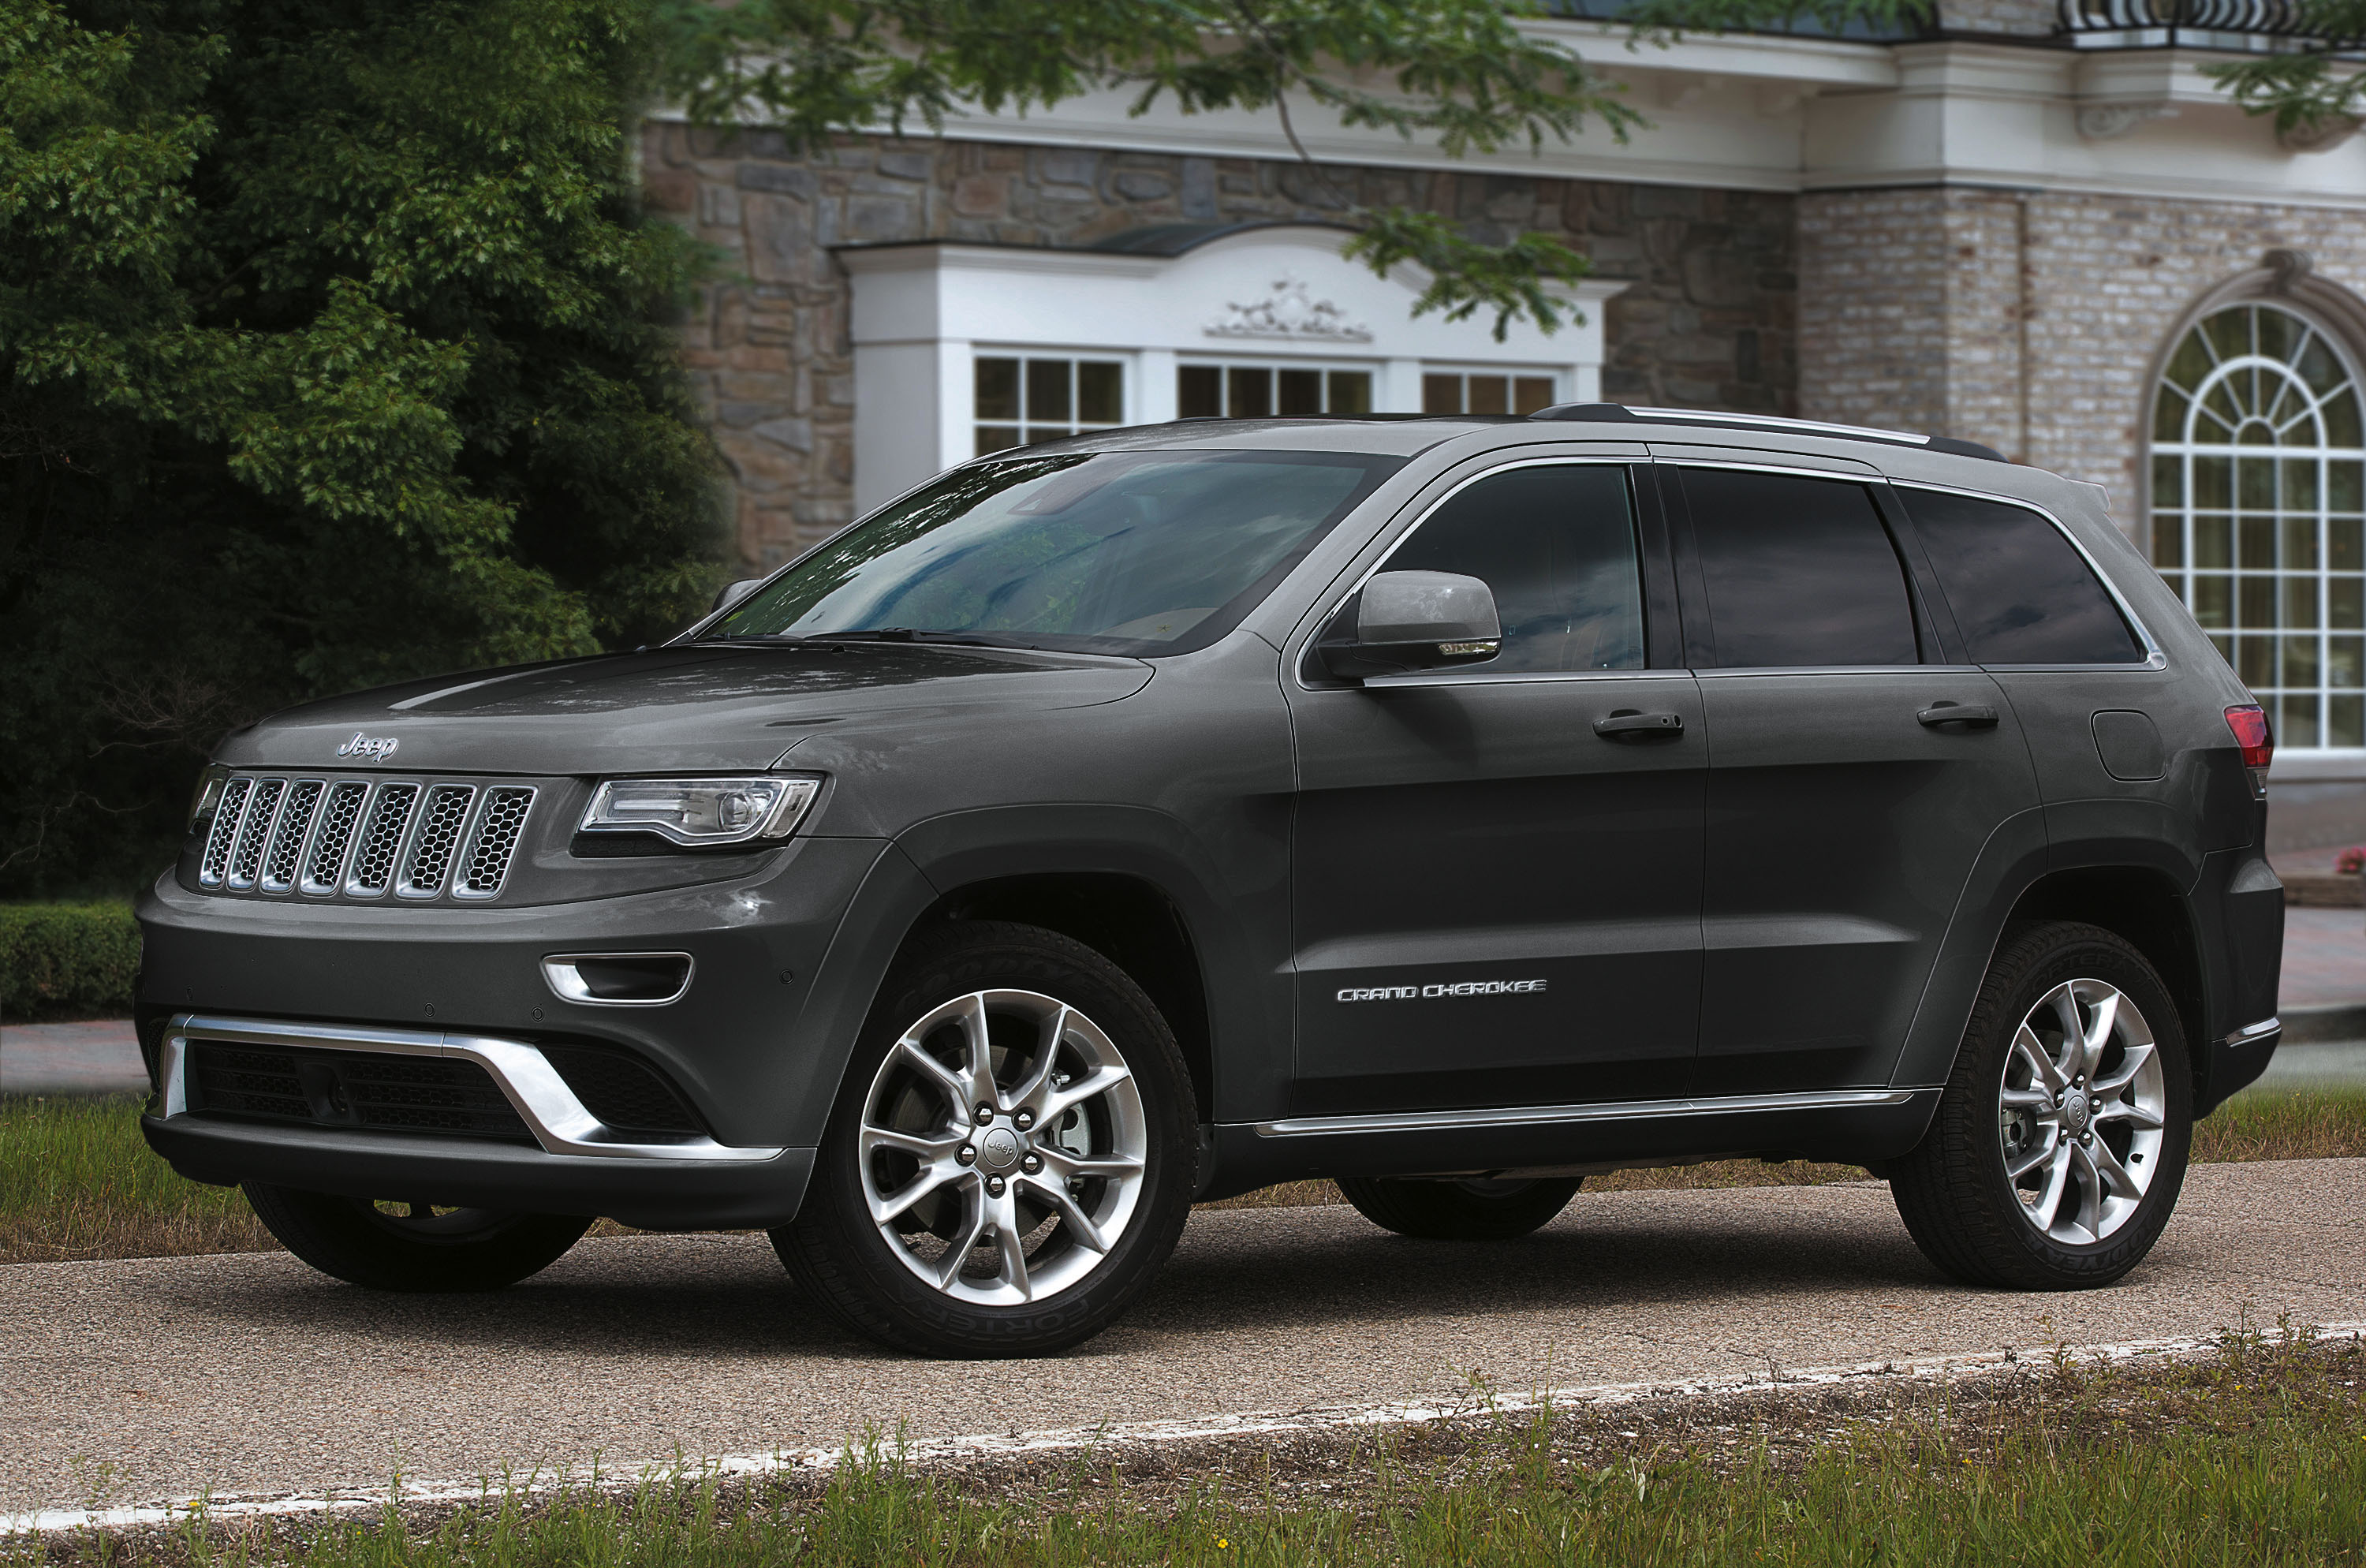 2017 Jeep Cherokee Prices Announced Rev.ie